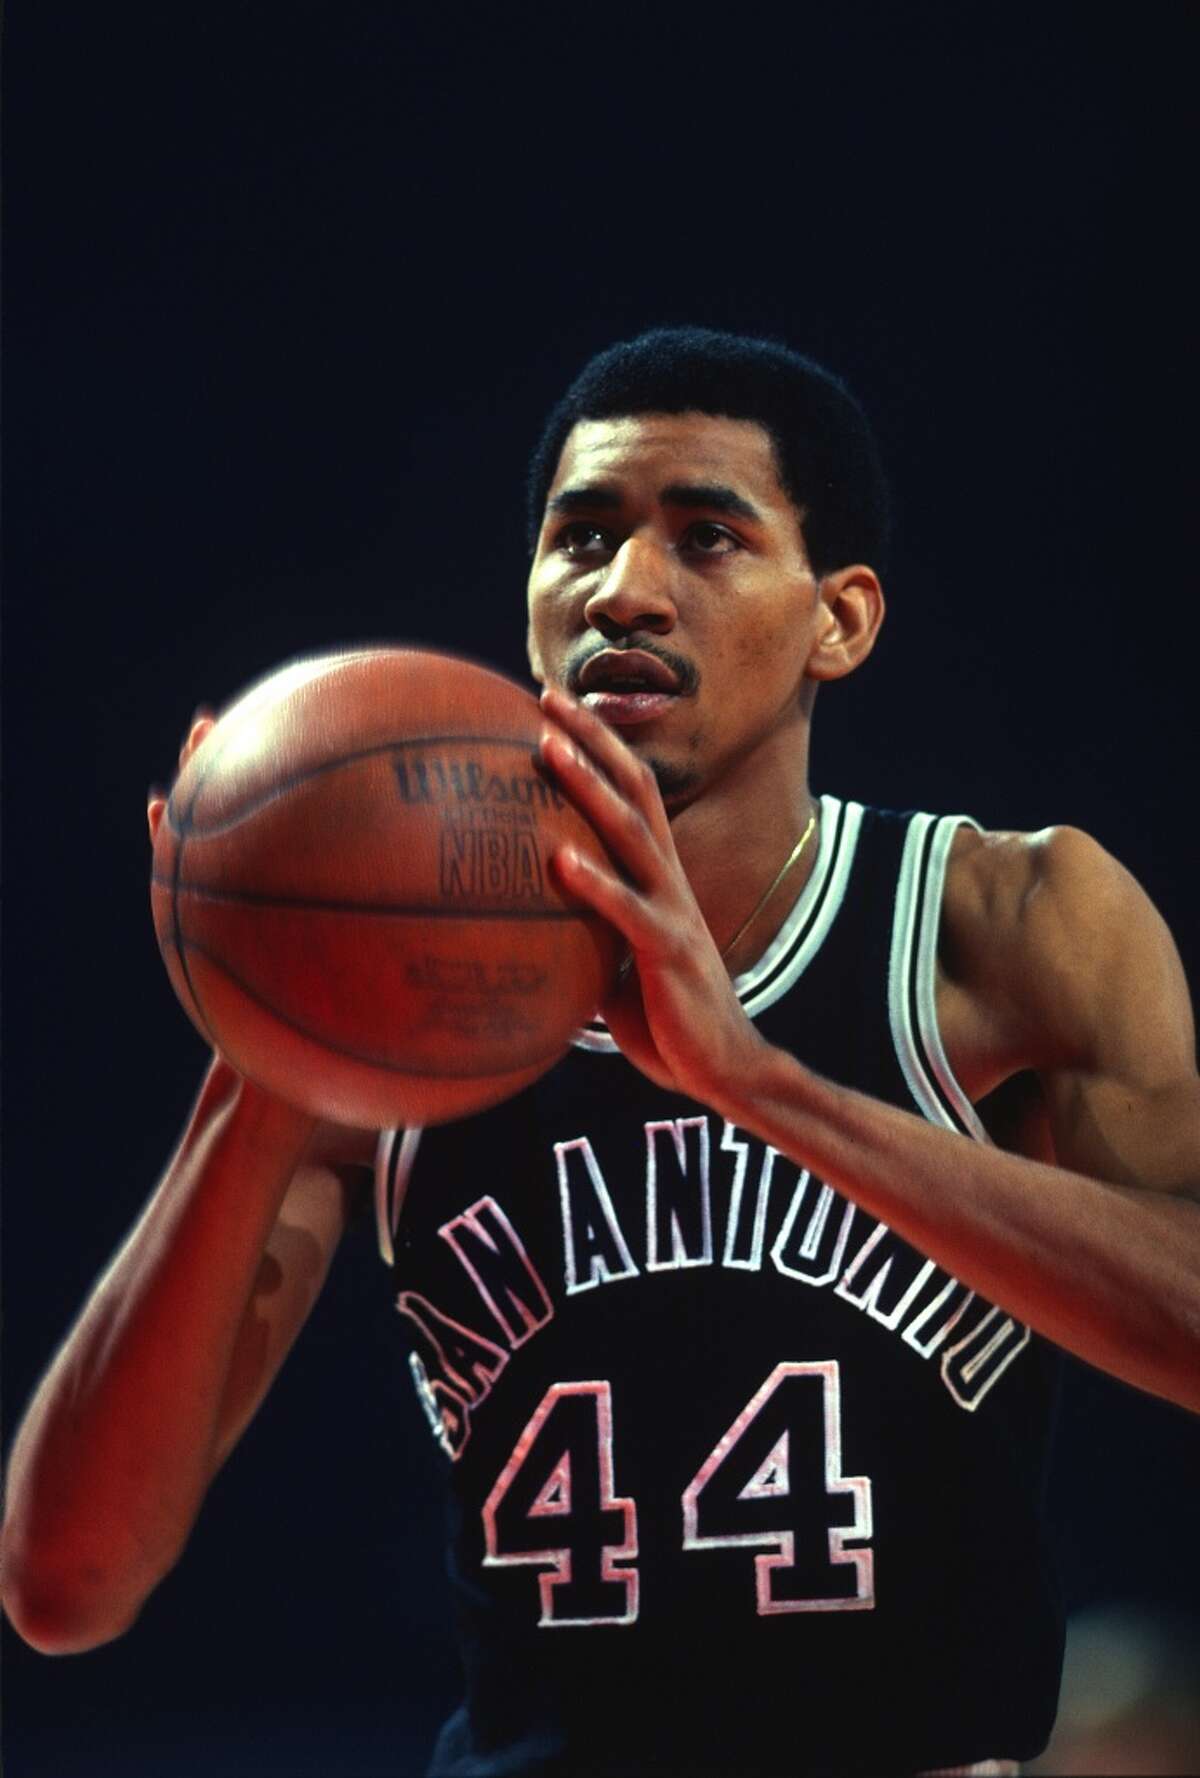 Date: Jan. 30 1974 Deal: Spurs trade/buy George Gervin from the Virginia Squires for $225,000.